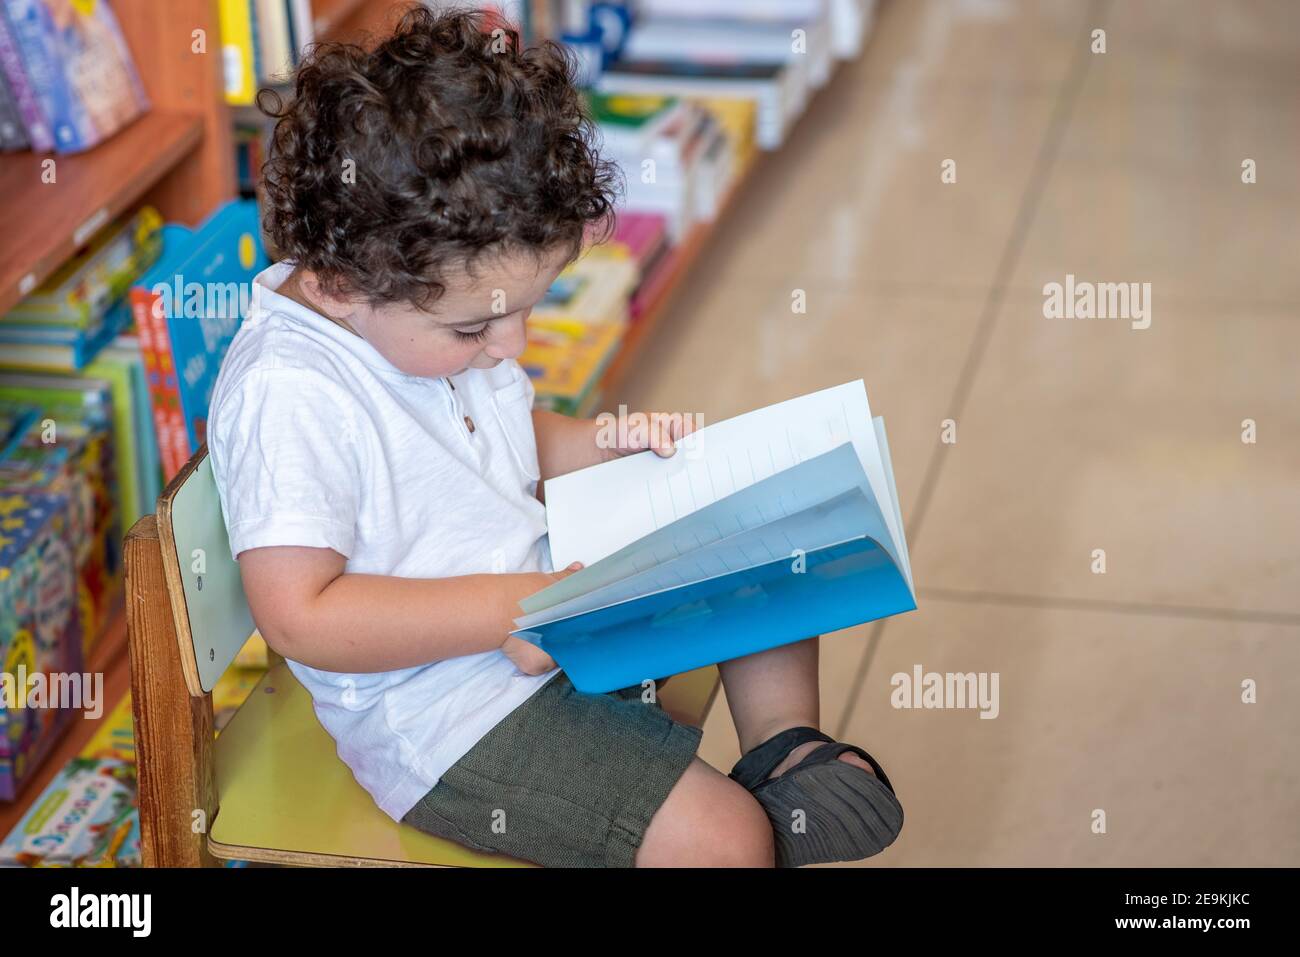 Little Boy Indoors In Front Of Books. Cute Young Toddler Sitting On A Chair Near Table and Reading Book. Child reads in a bookstore, surrounded by colorful books. Library, Shop, Shelving In School. Stock Photo